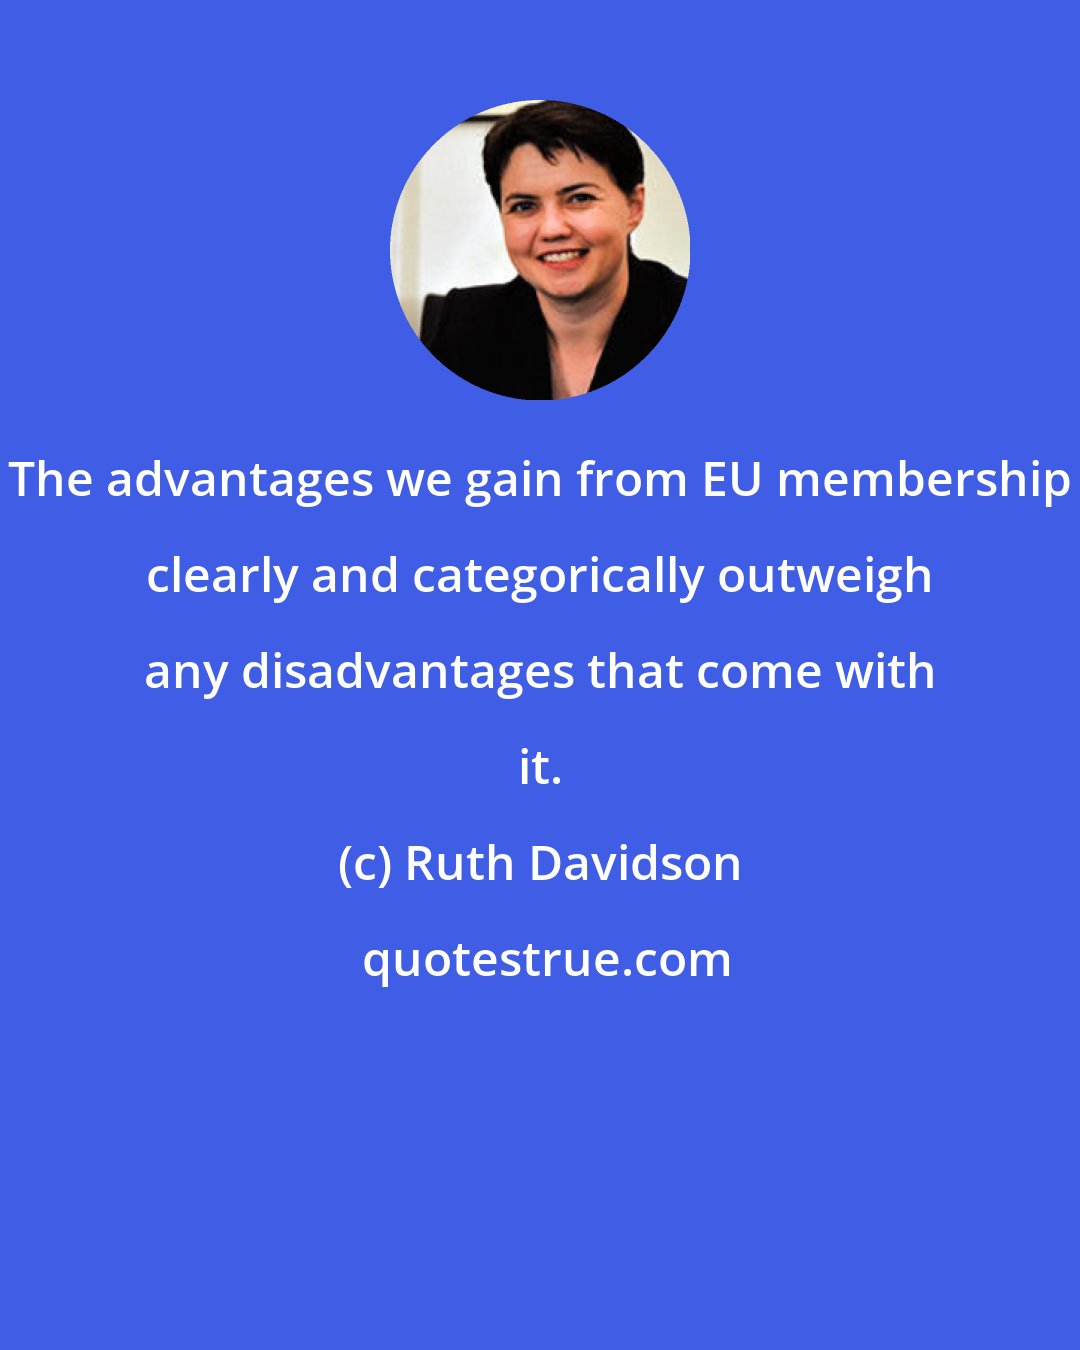 Ruth Davidson: The advantages we gain from EU membership clearly and categorically outweigh any disadvantages that come with it.